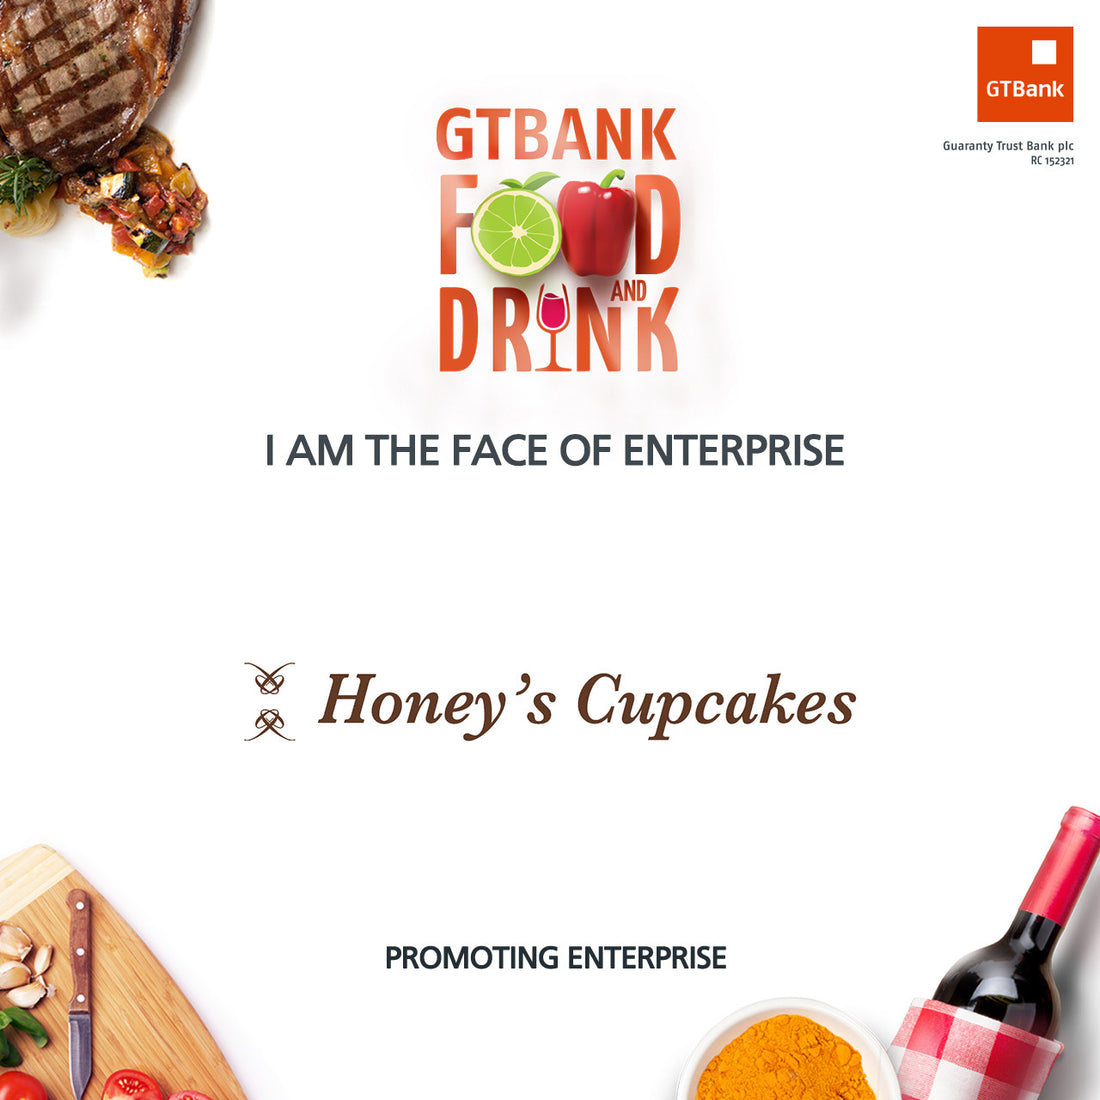 GTBank Food and Drink Fair: Come Out and Play With Us!